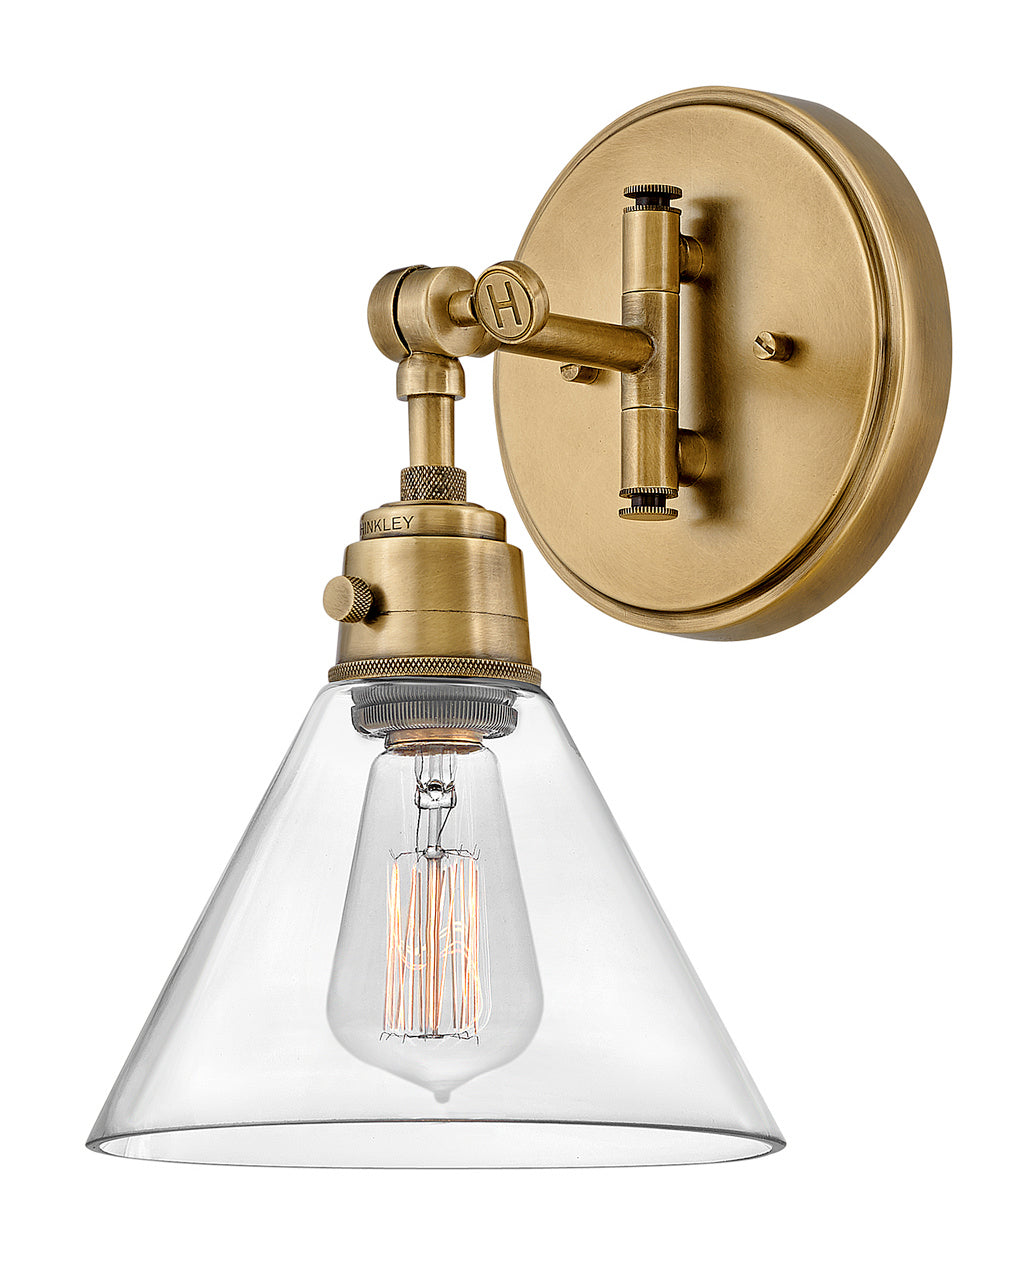 Hinkley - 3691HB-CL - LED Wall Sconce - Arti - Heritage Brass